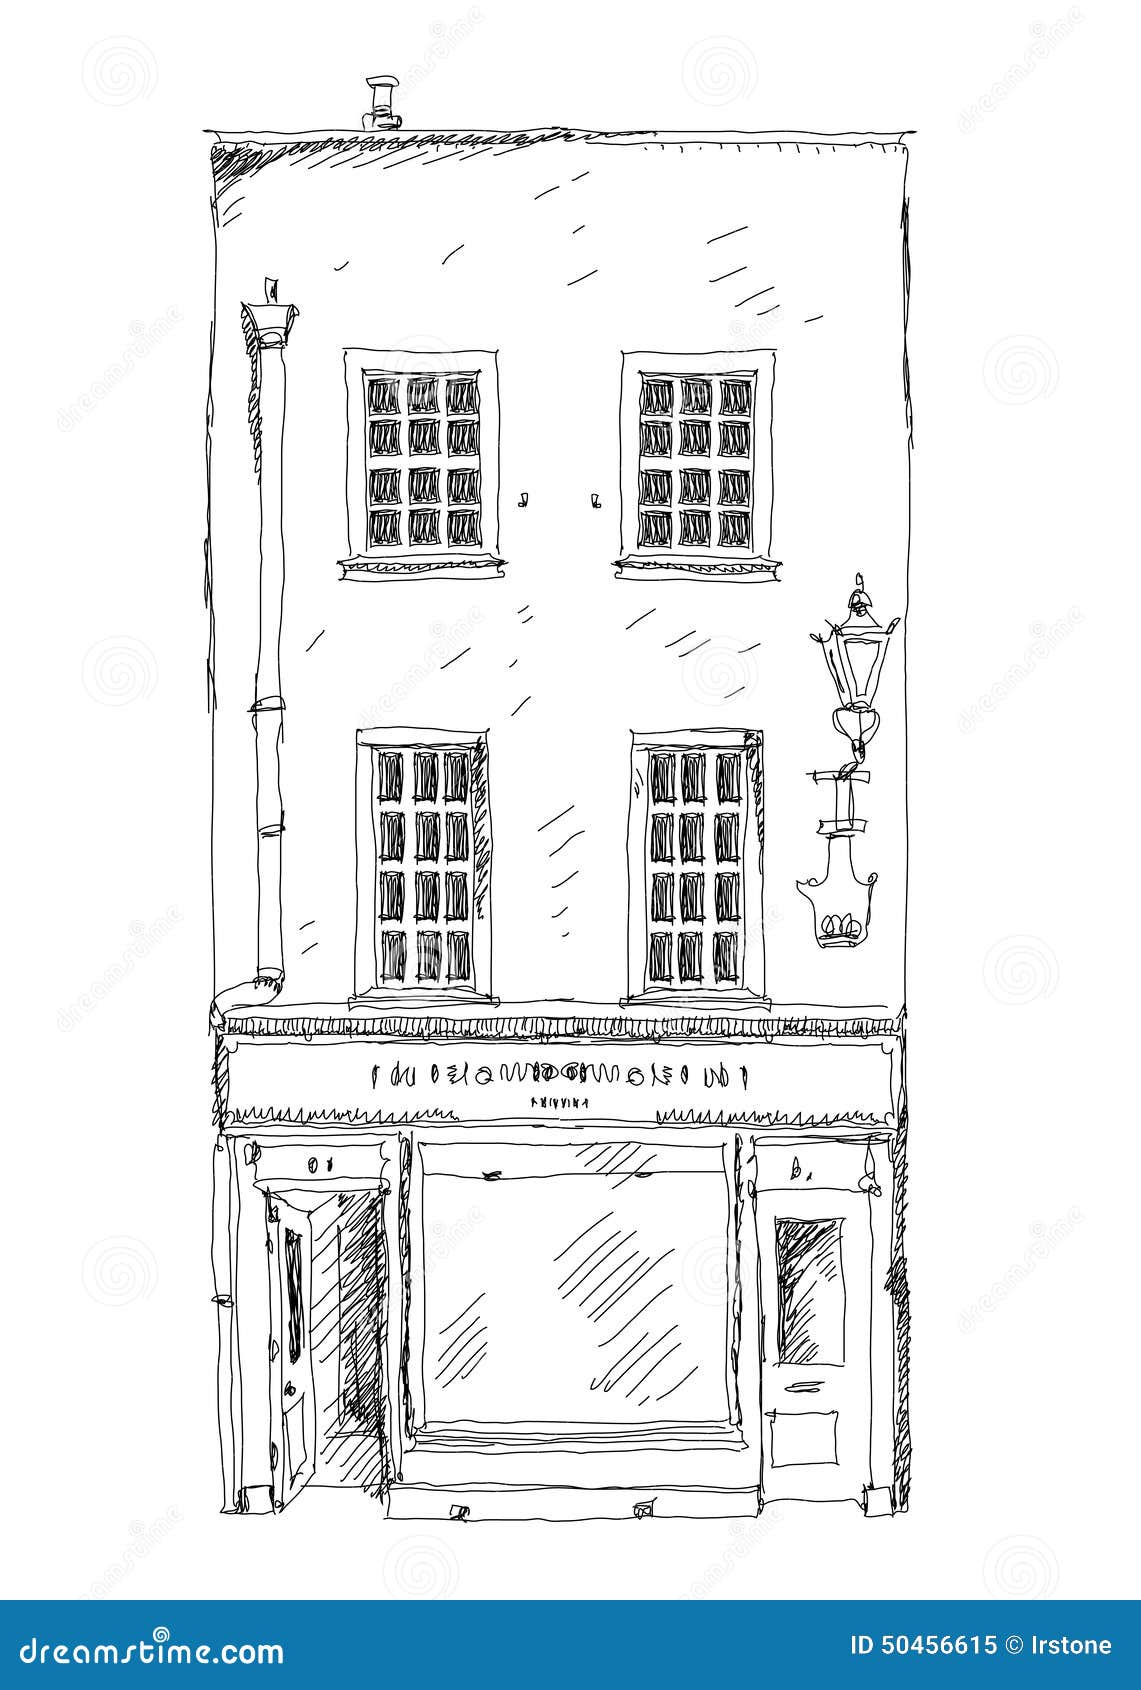 Old English Town House With Small Shop Or Business On Ground Floor